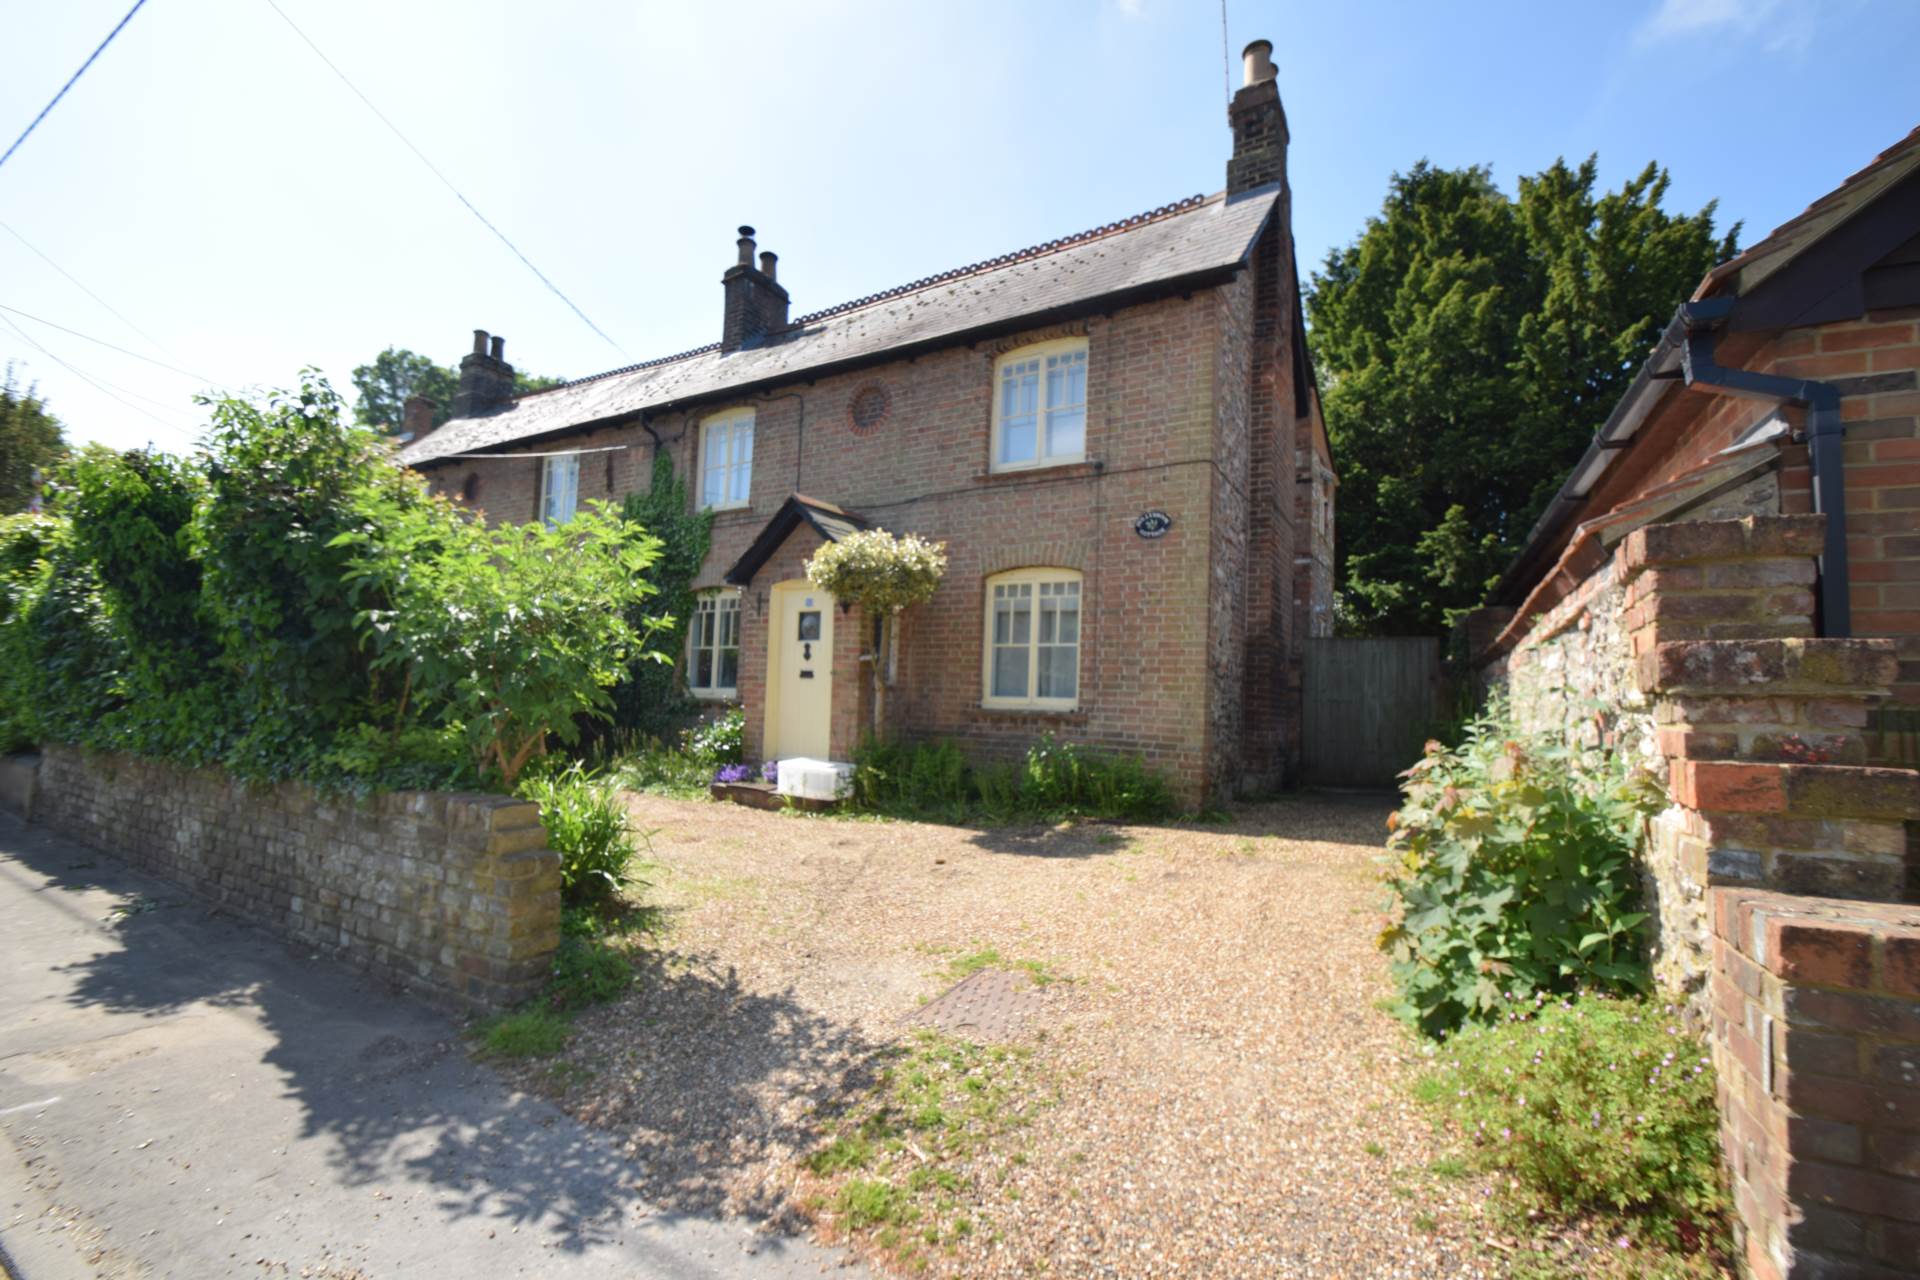 4 bed Semi-Detached House for rent in Watlington. From Griffith & Partners - Watlington